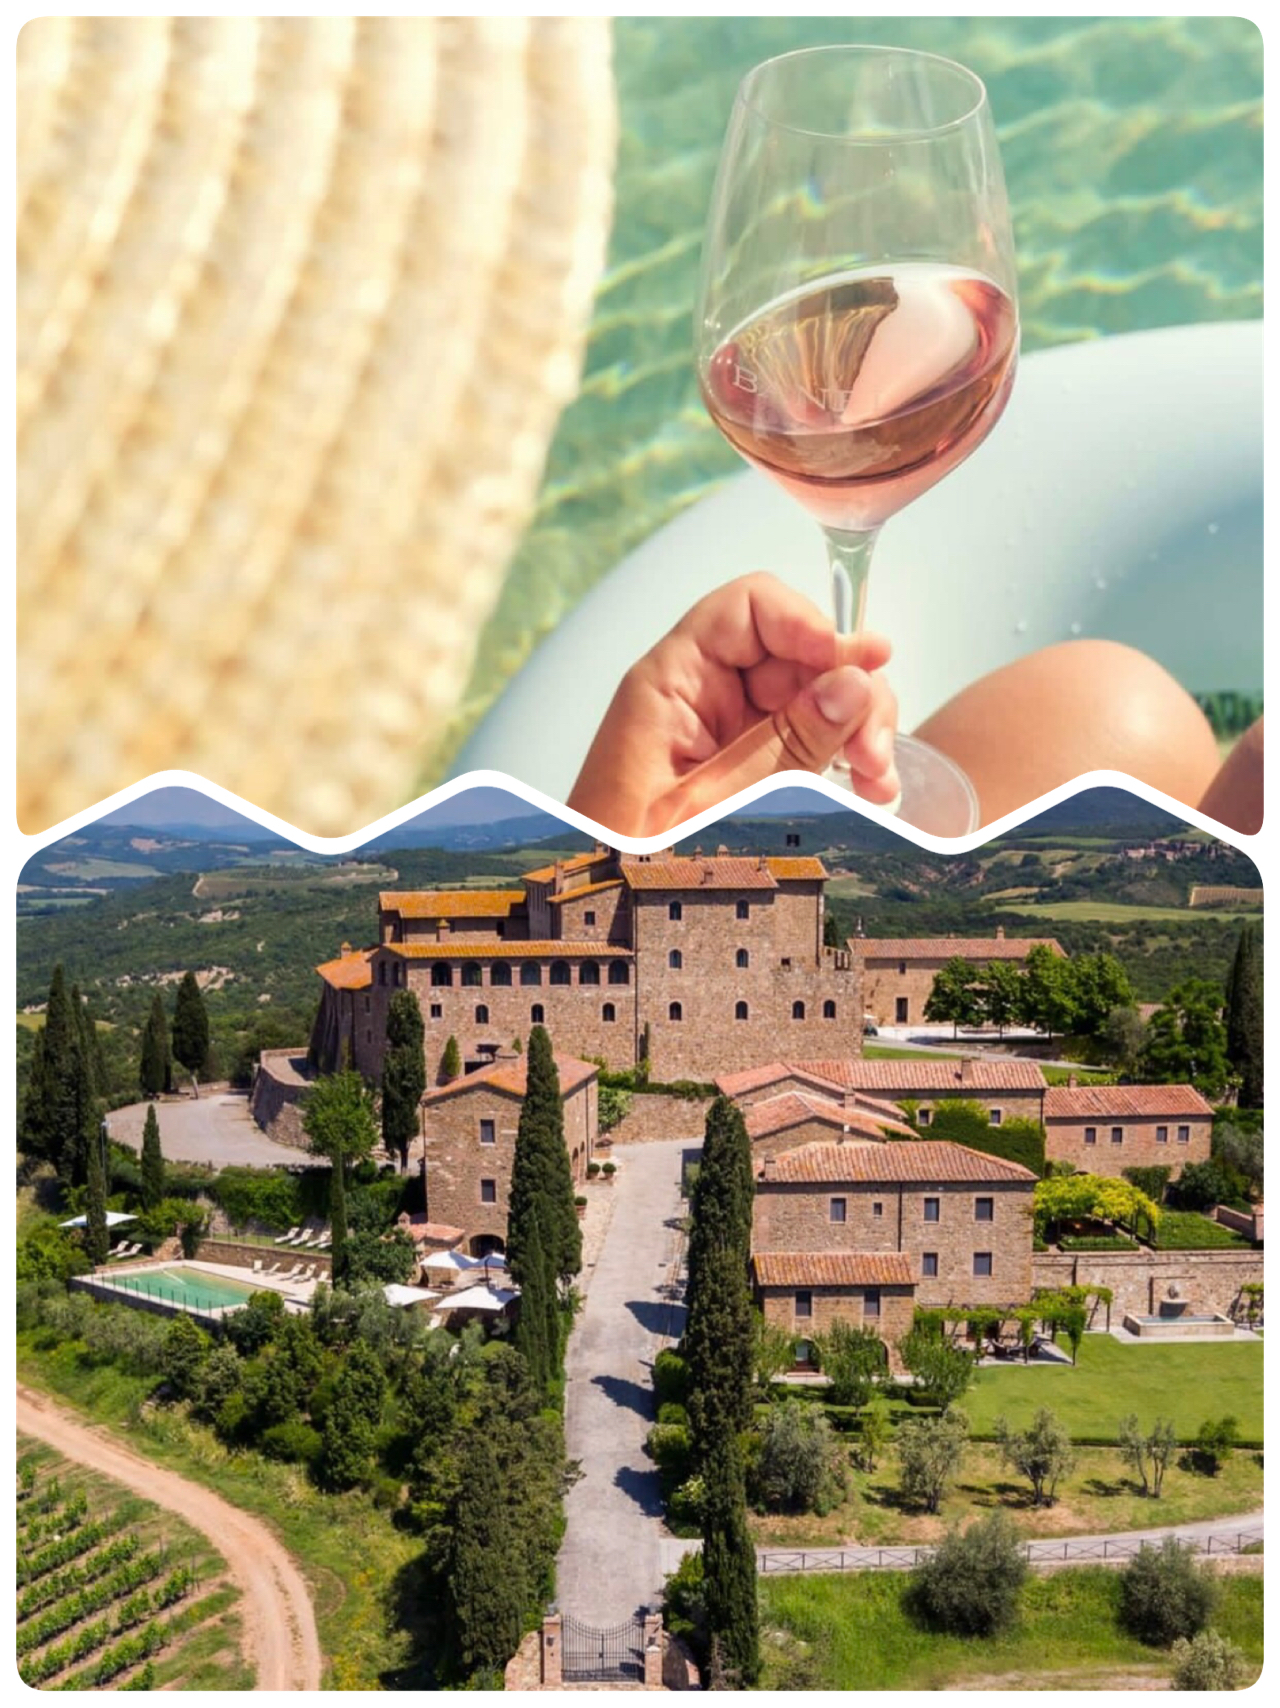 Italy Wellness Tour: The Ultimate VIP Tuscany Experience